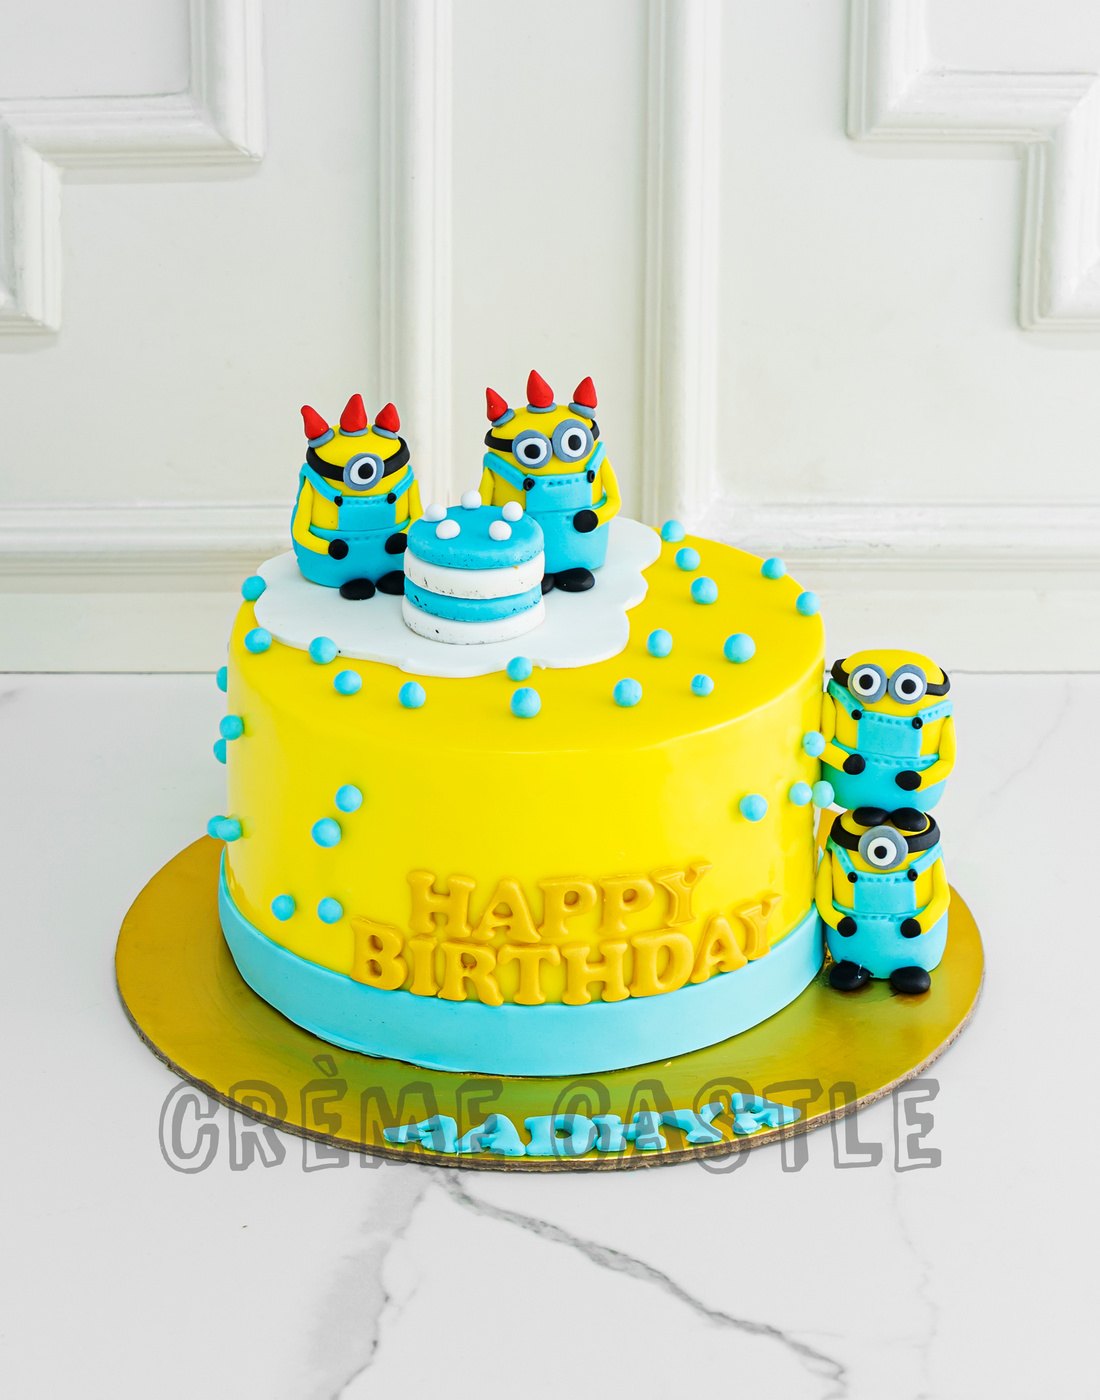 Minions The Rise of Gru Two~Tier Cake |Two Tier Cake|The Cake Store